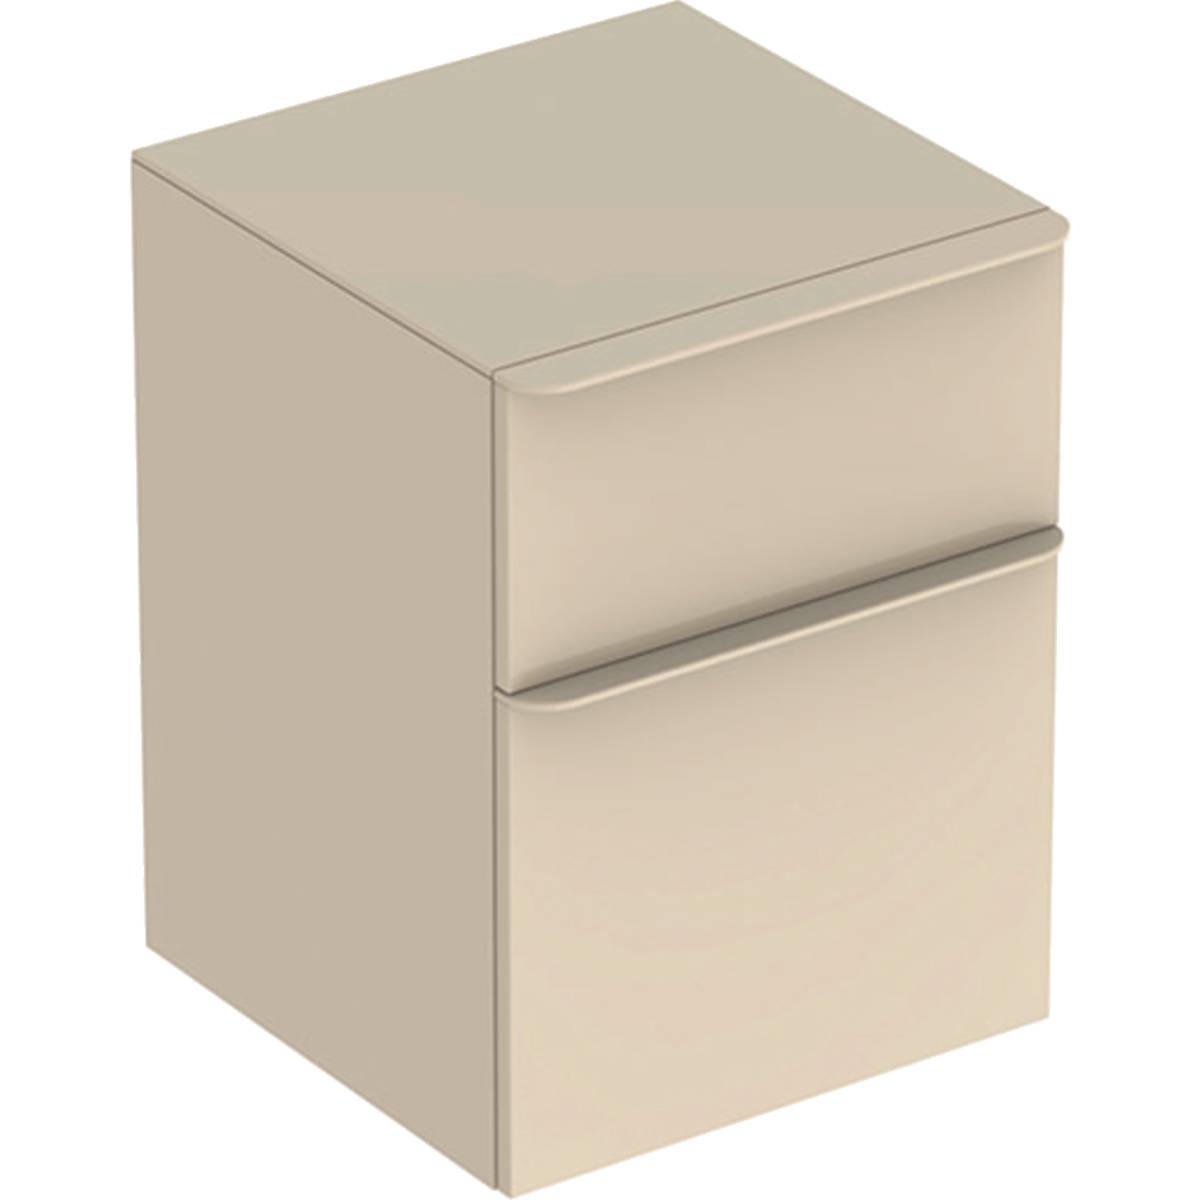 Smyle Square low cabinet with two drawers